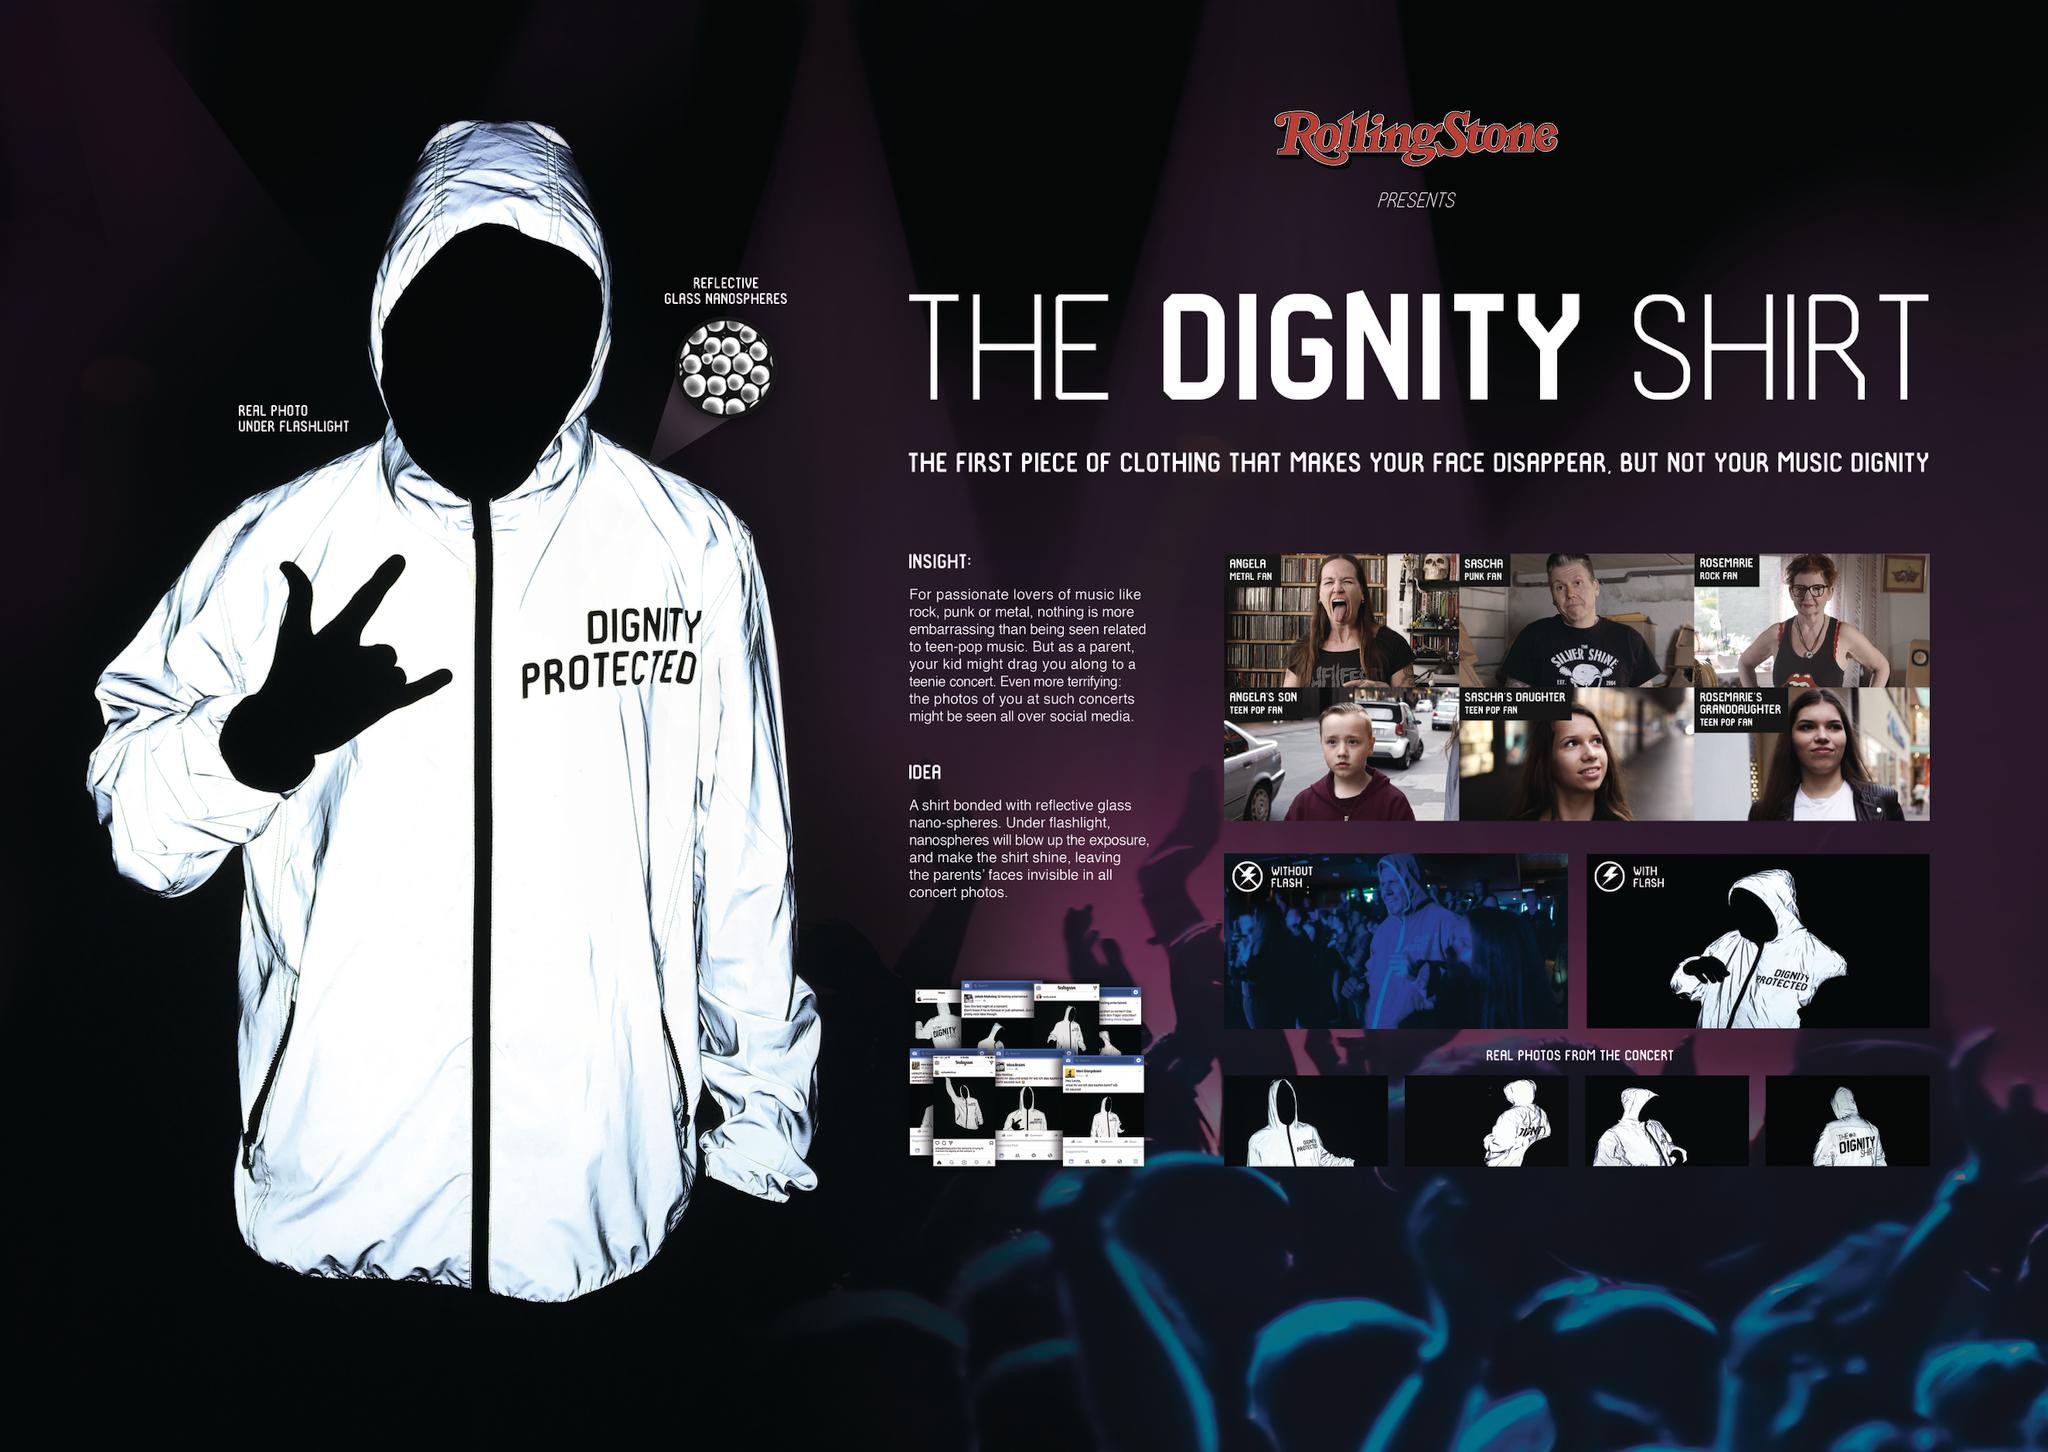 THE DIGNITY SHIRT